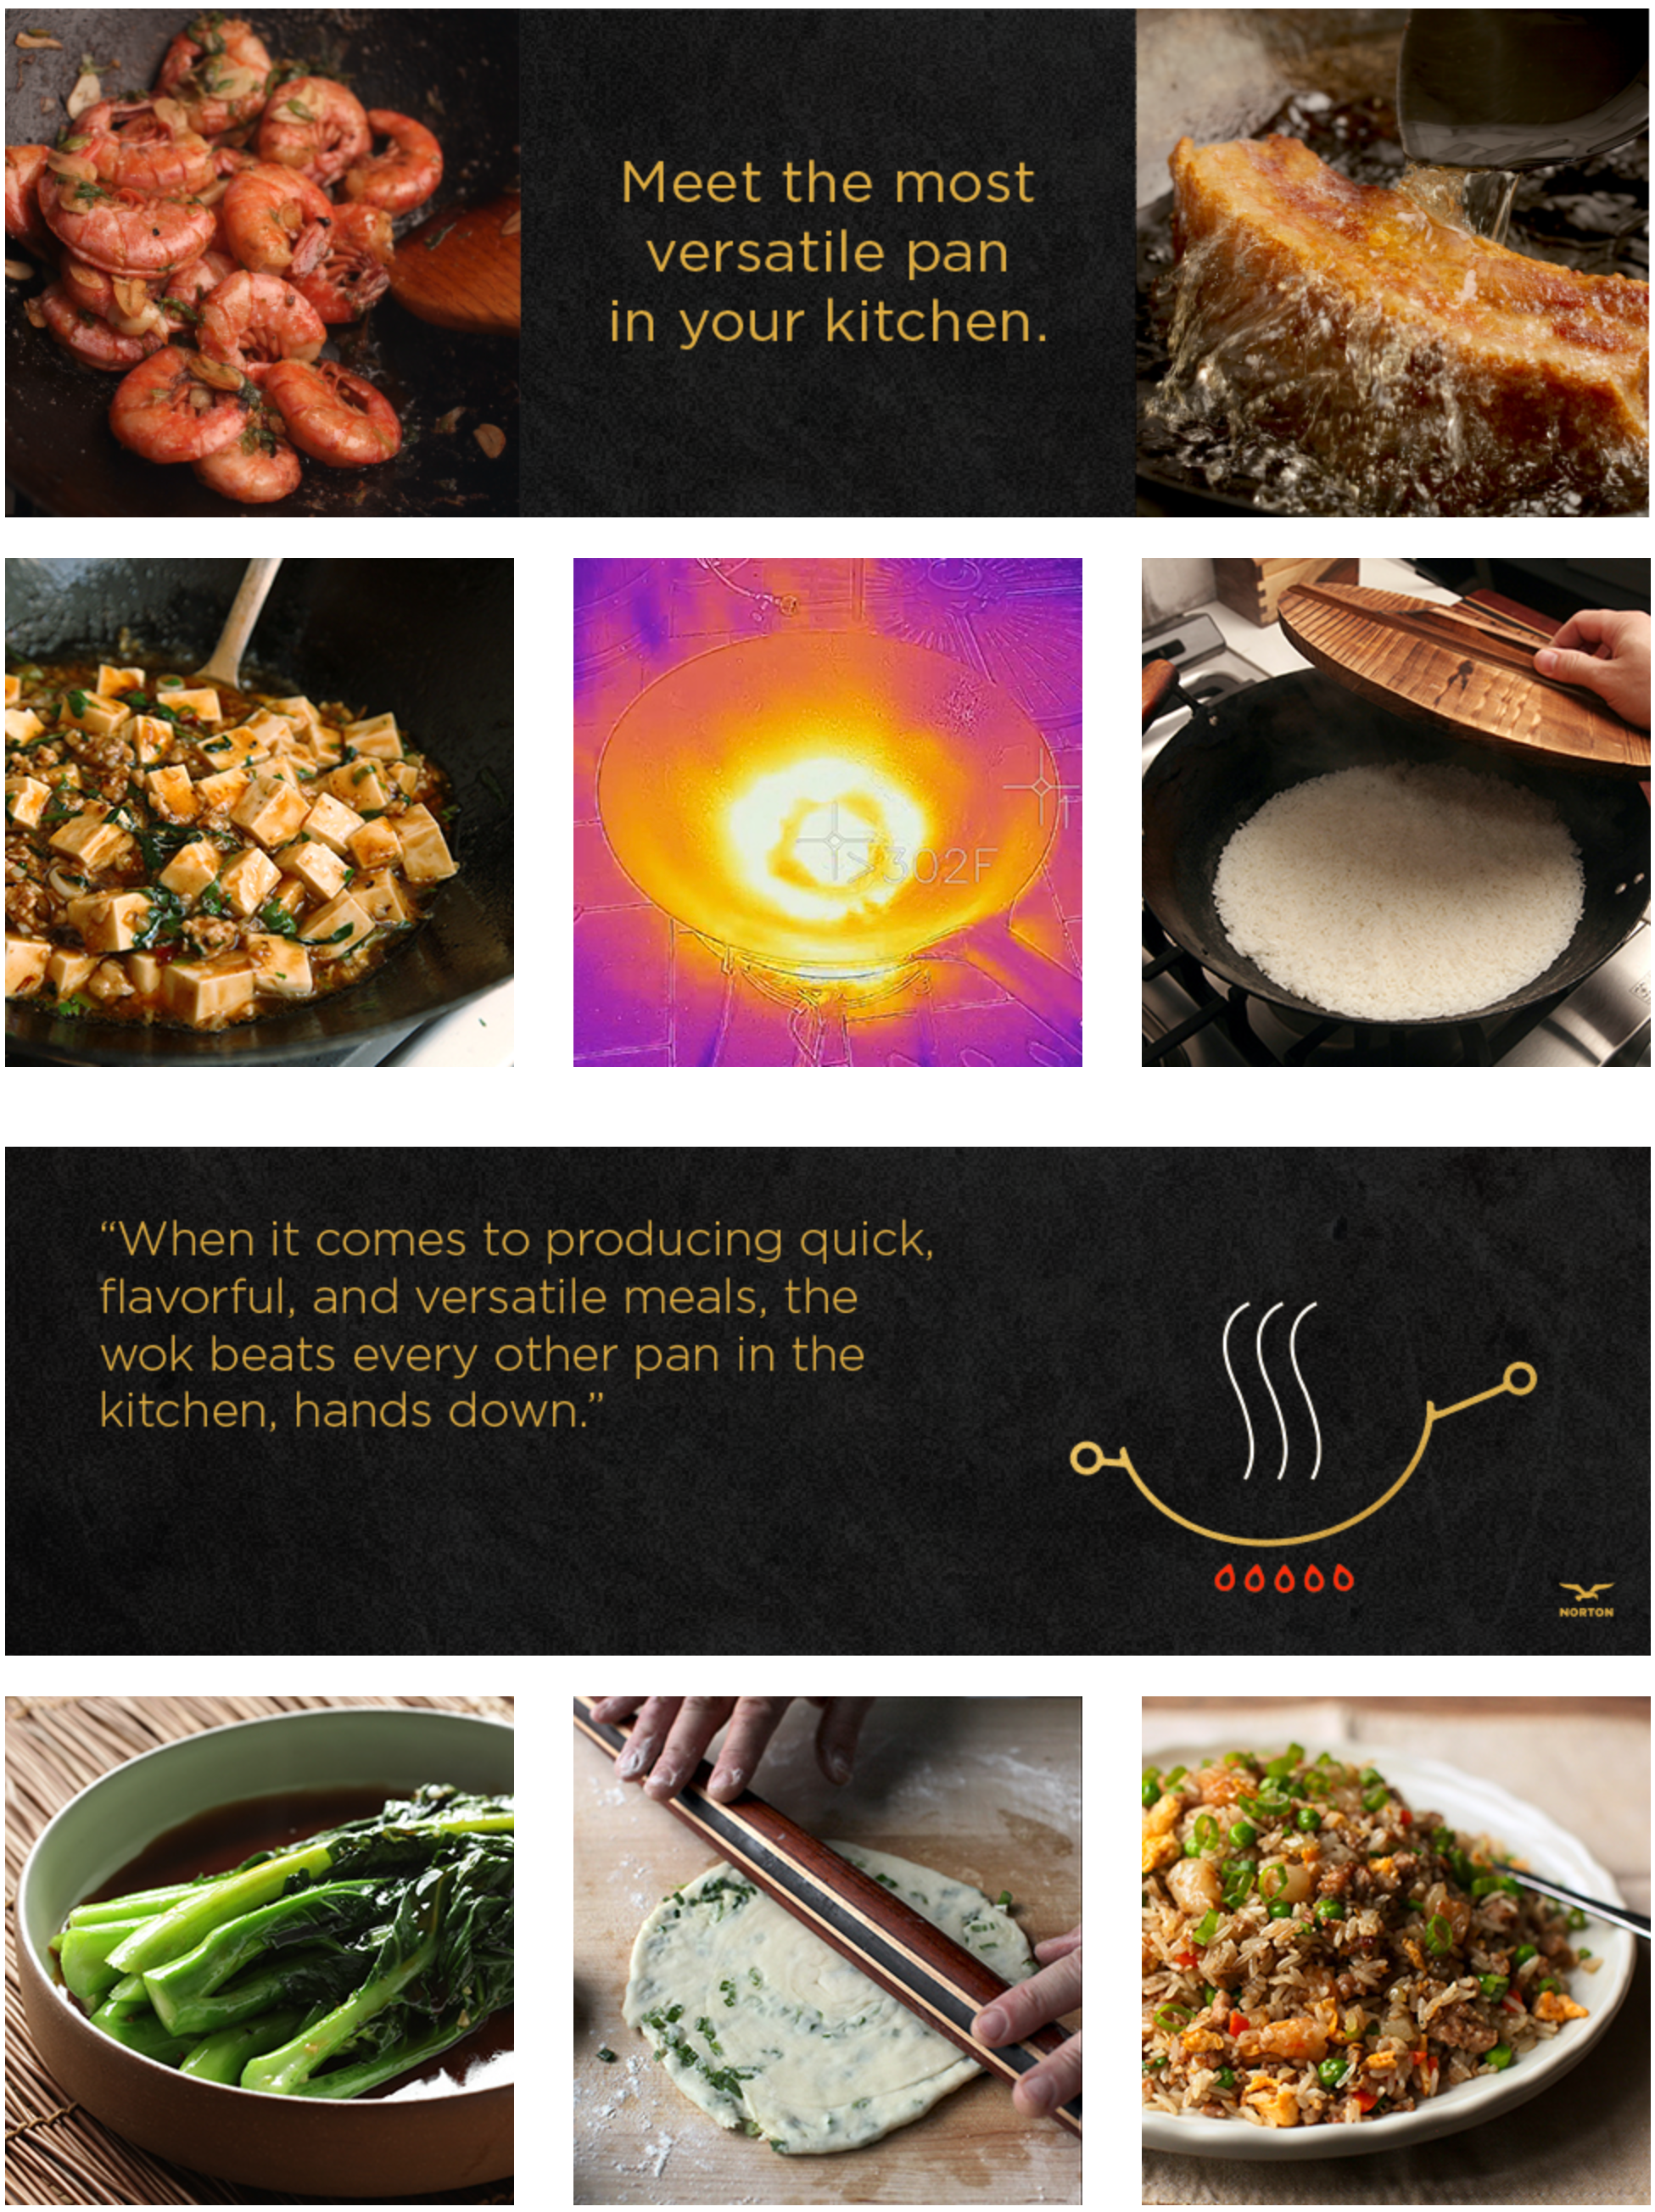 Excerpts from the book: The Wok